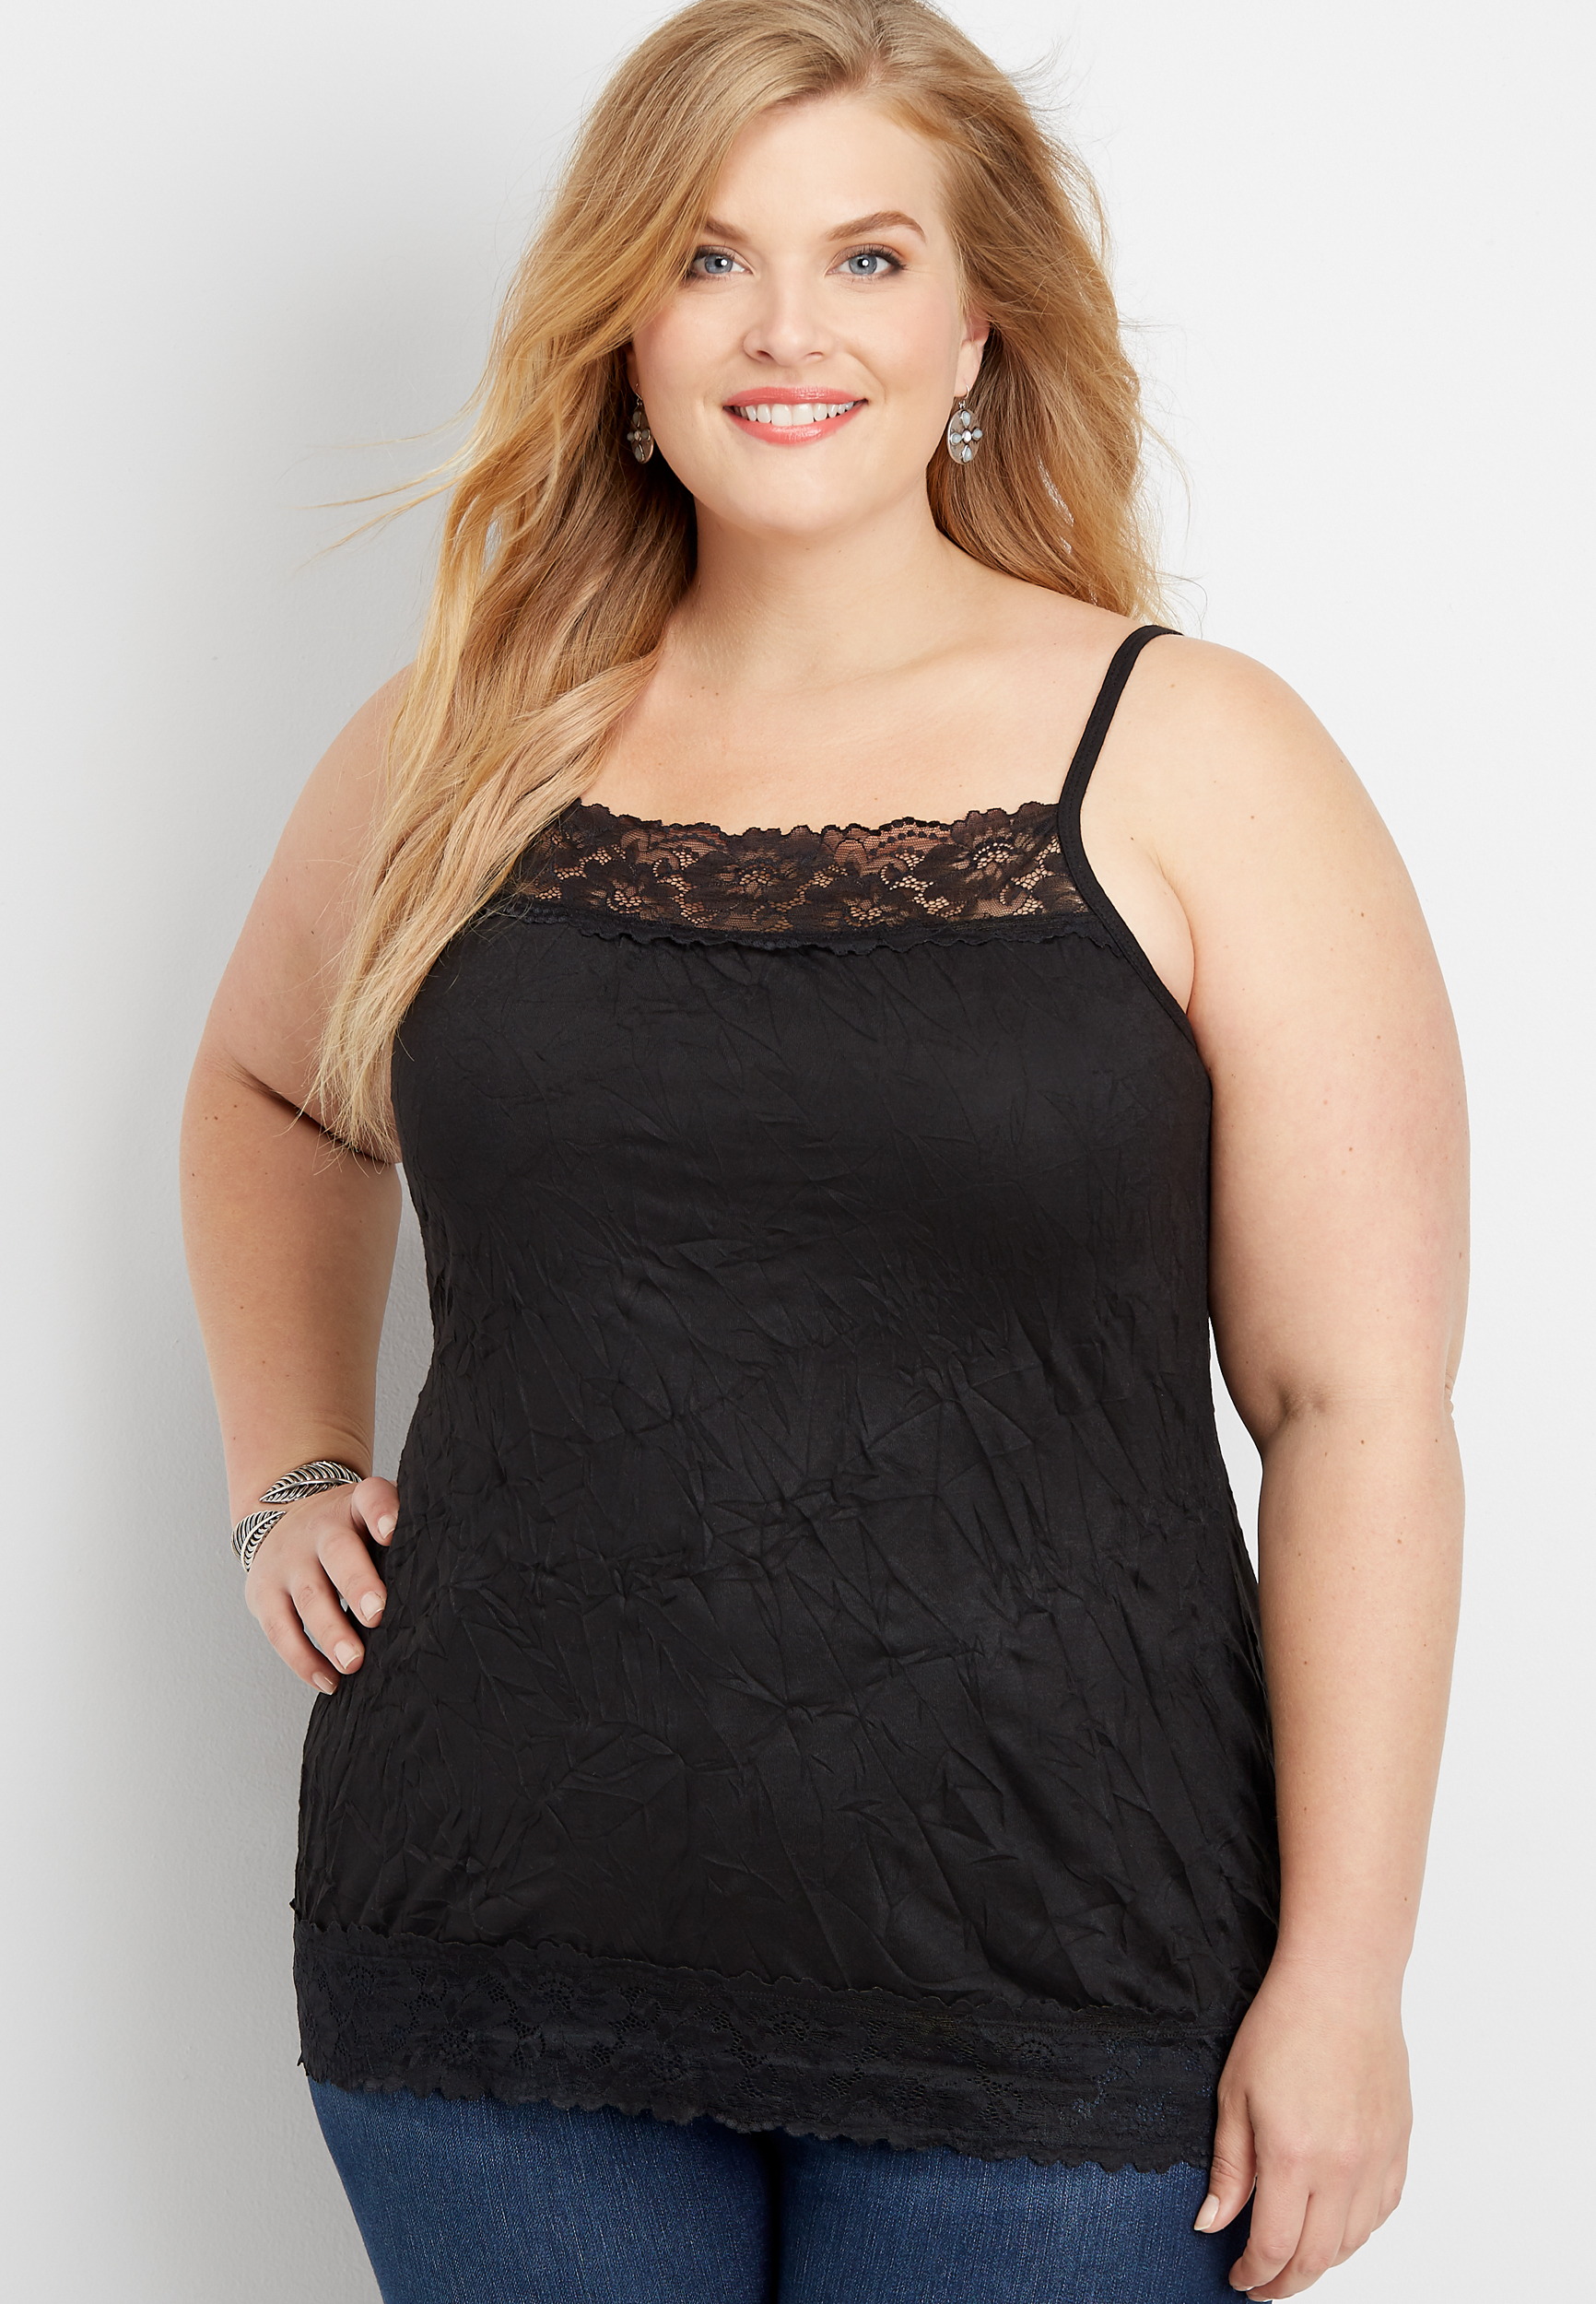 3 PACK Plus Size Black & White Cami Tops